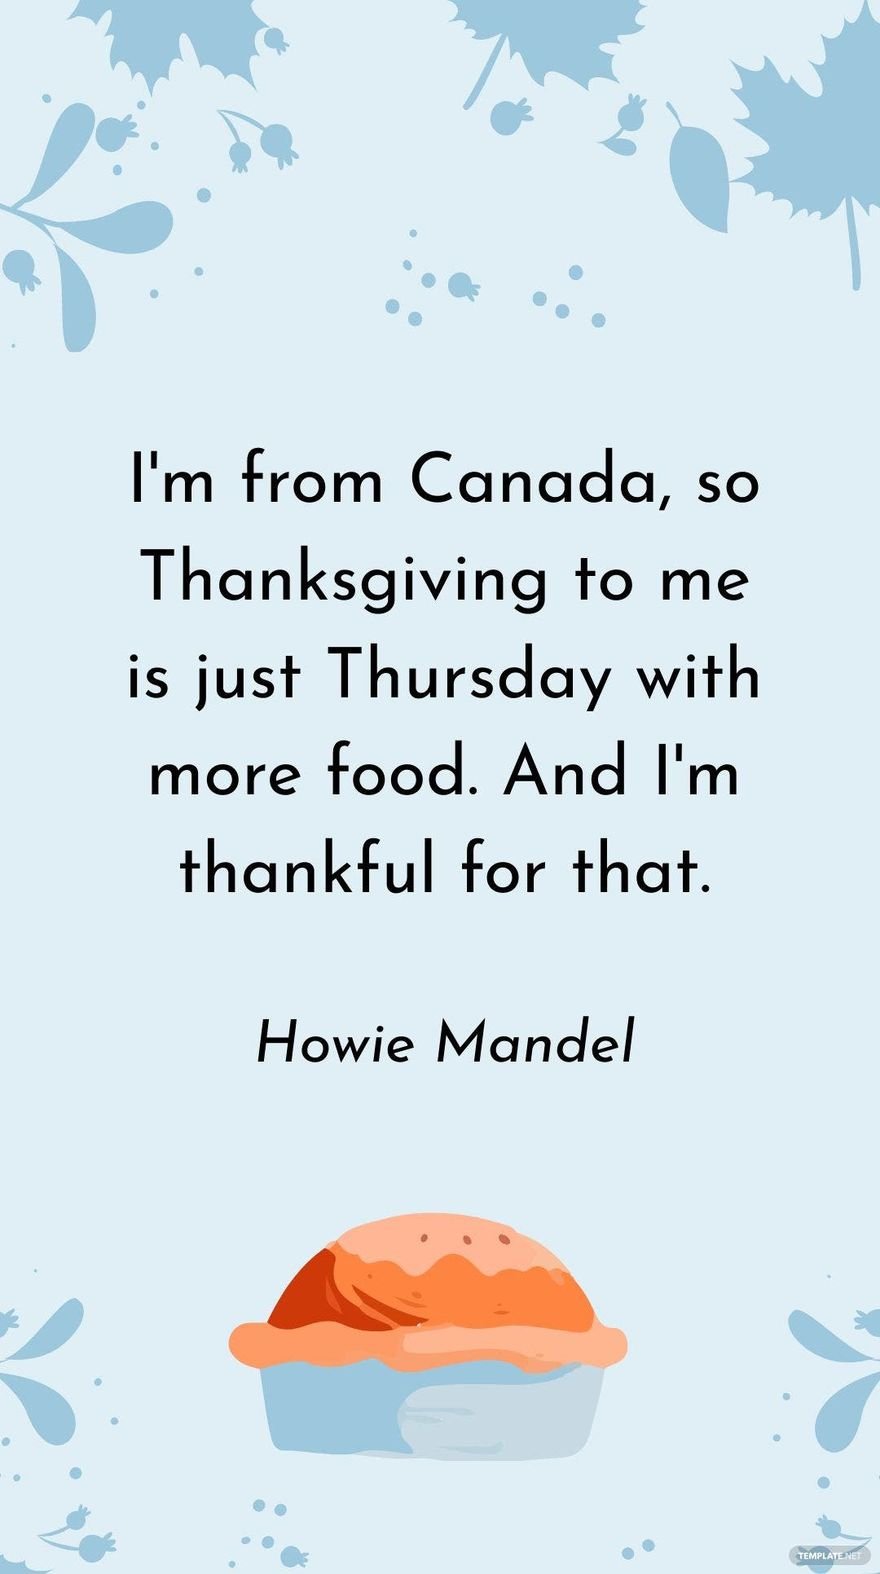 Free Howie Mandel - I'm from Canada, so Thanksgiving to me is just Thursday with more food. And I'm thankful for that.